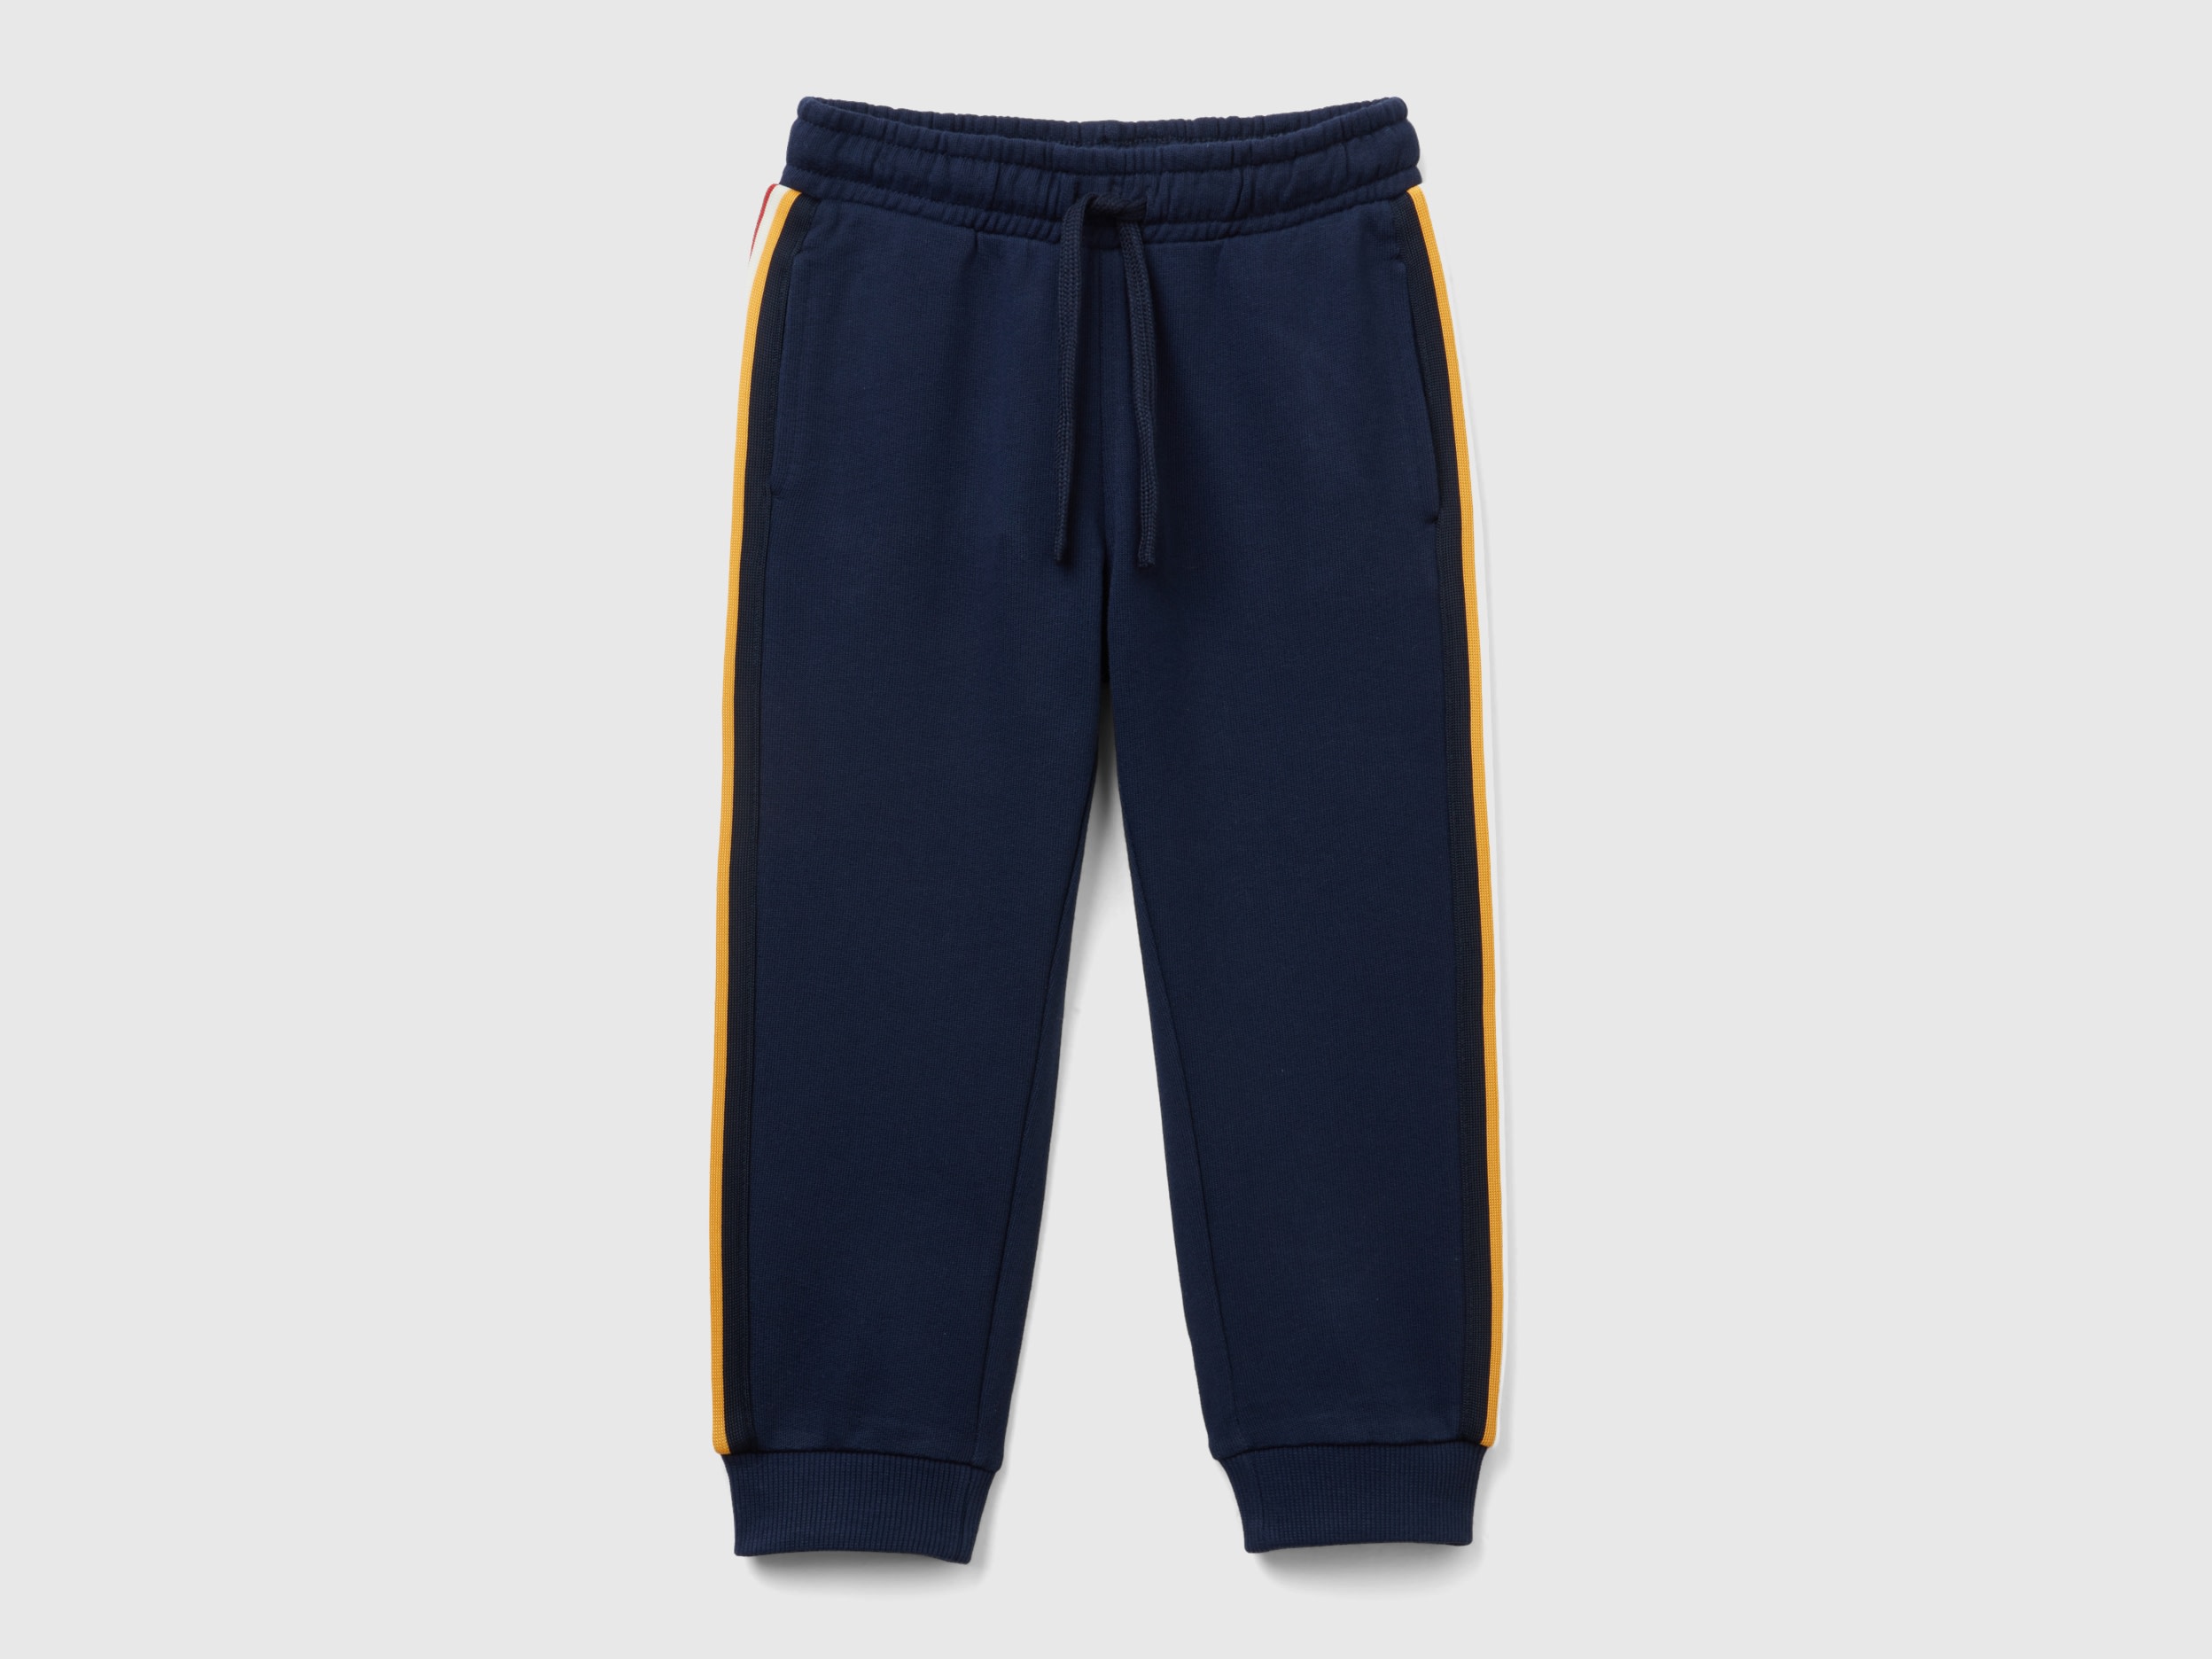 Benetton, Sweat Joggers With Bands, size 2-3, Dark Blue, Kids